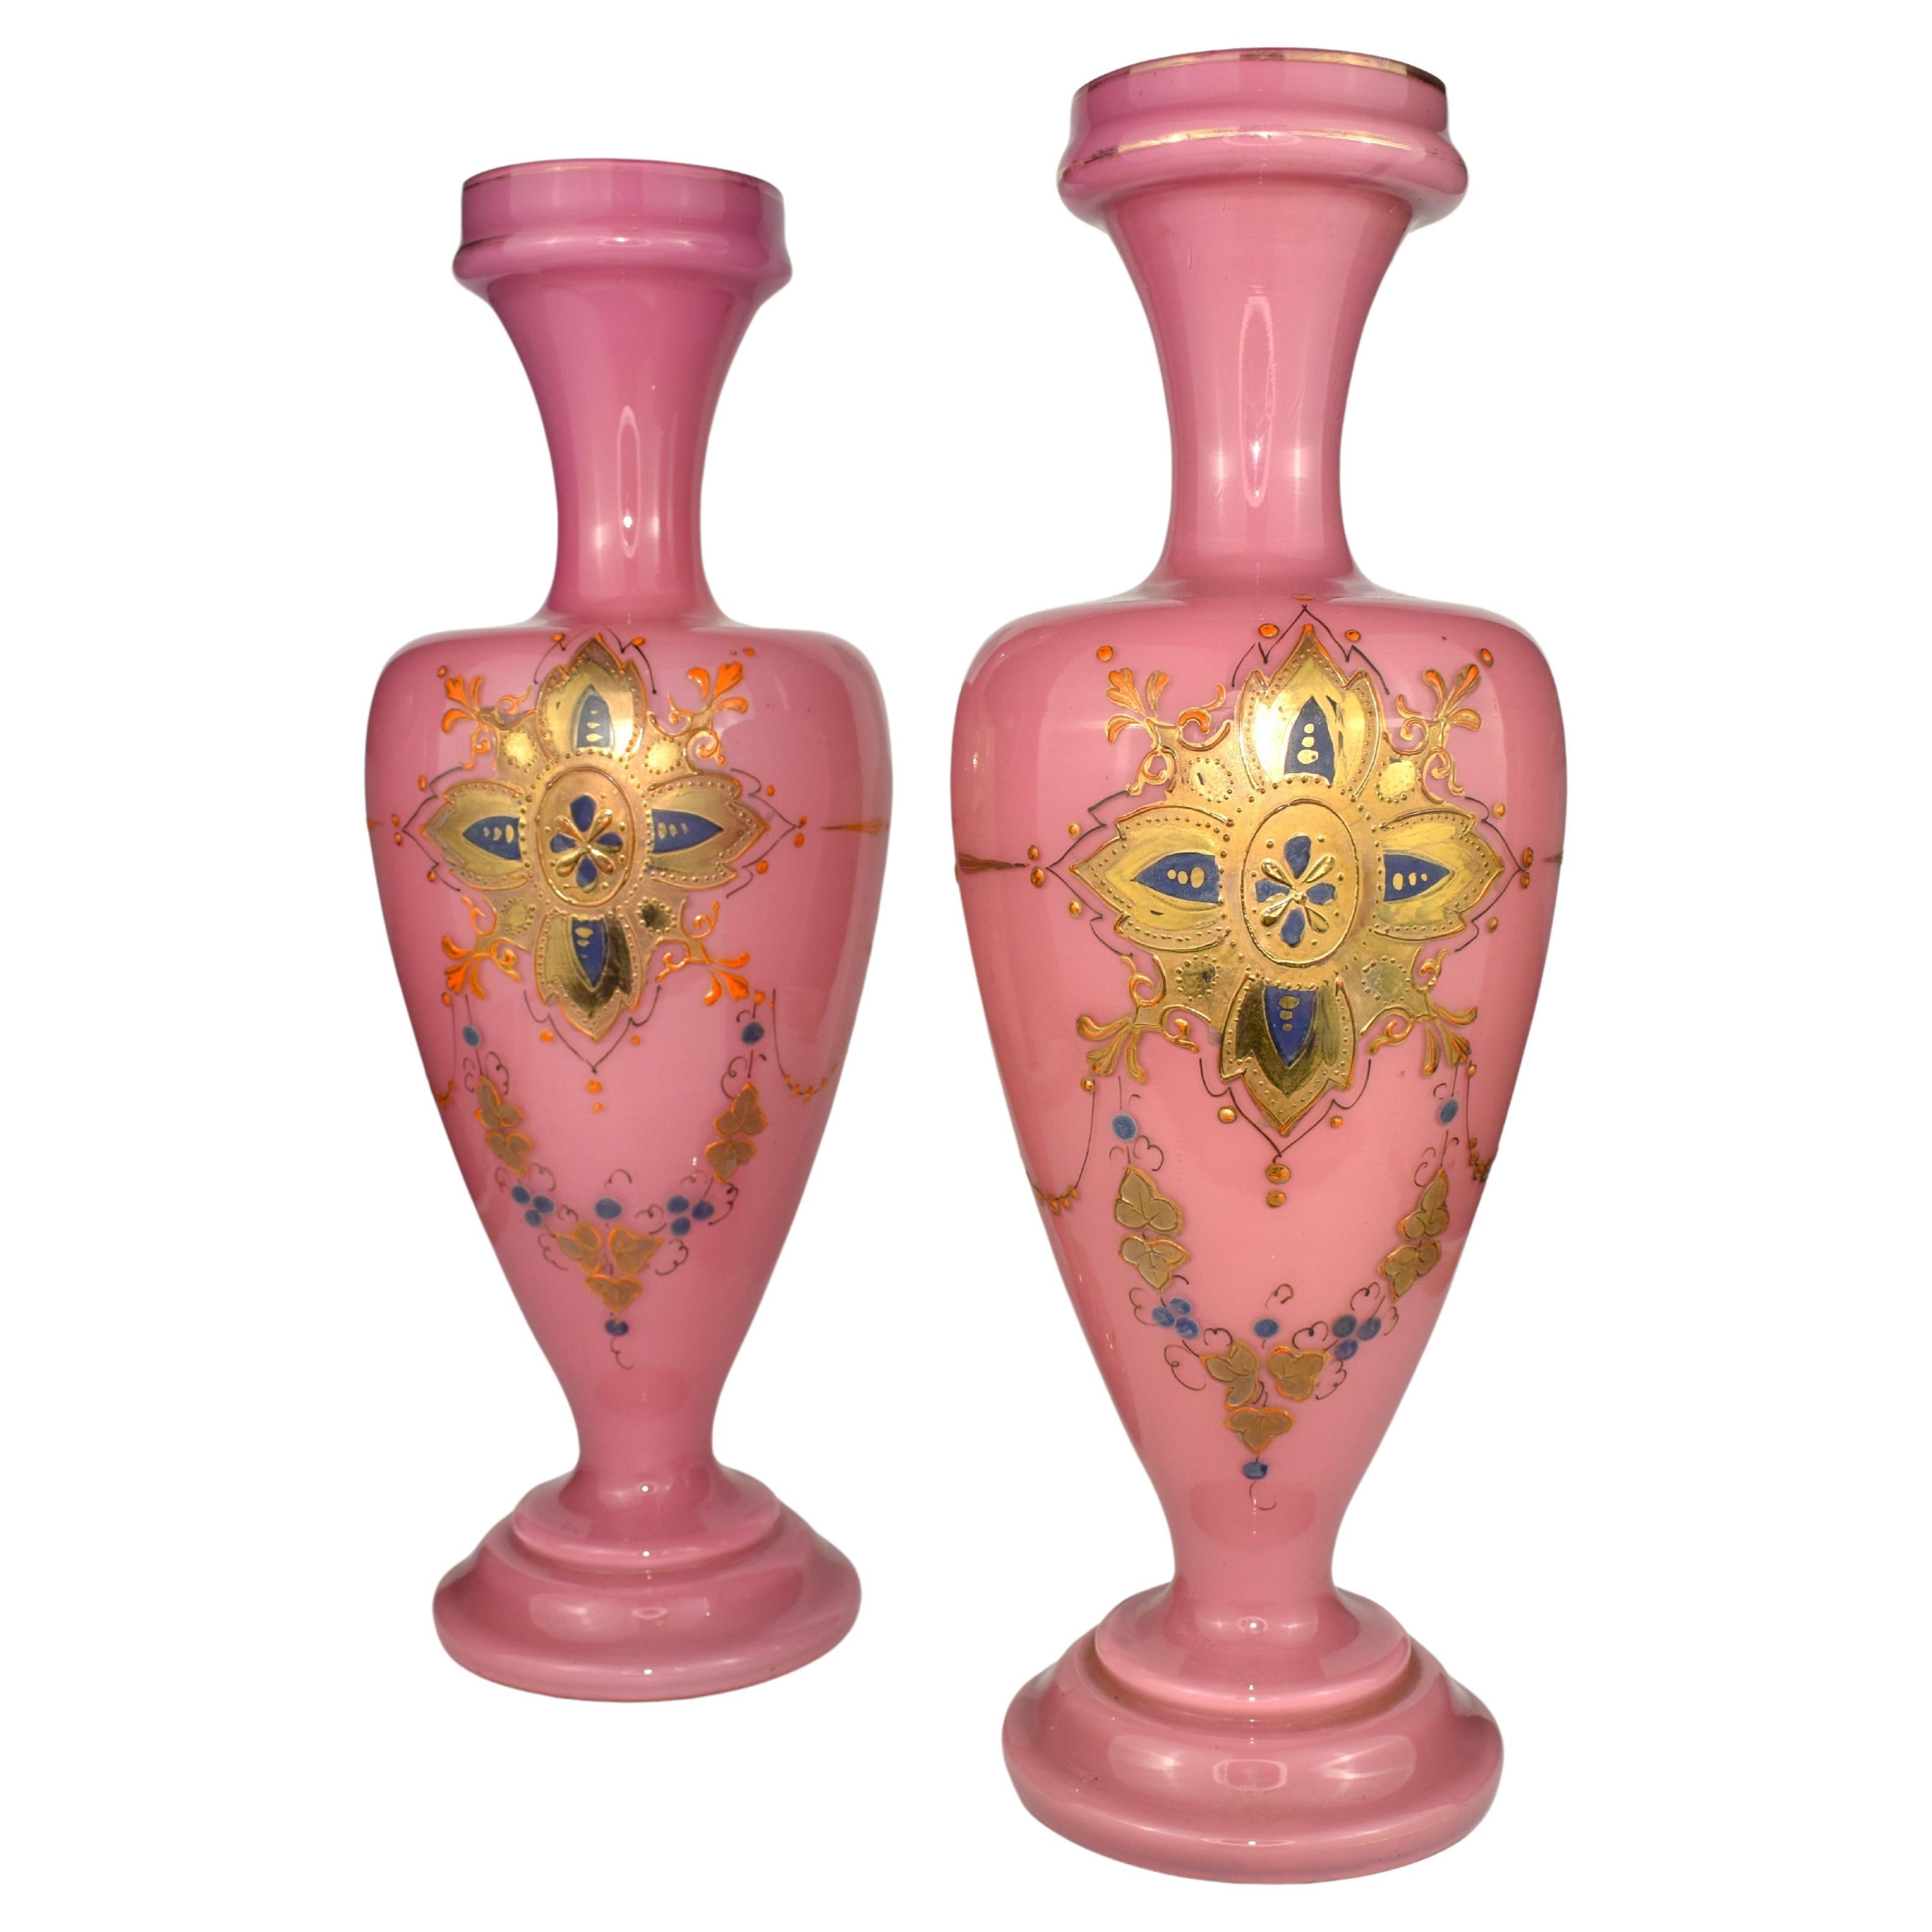 Antique Pair of French Opaline Enamelled Glass Vases, 19th Century In Good Condition For Sale In Rostock, MV